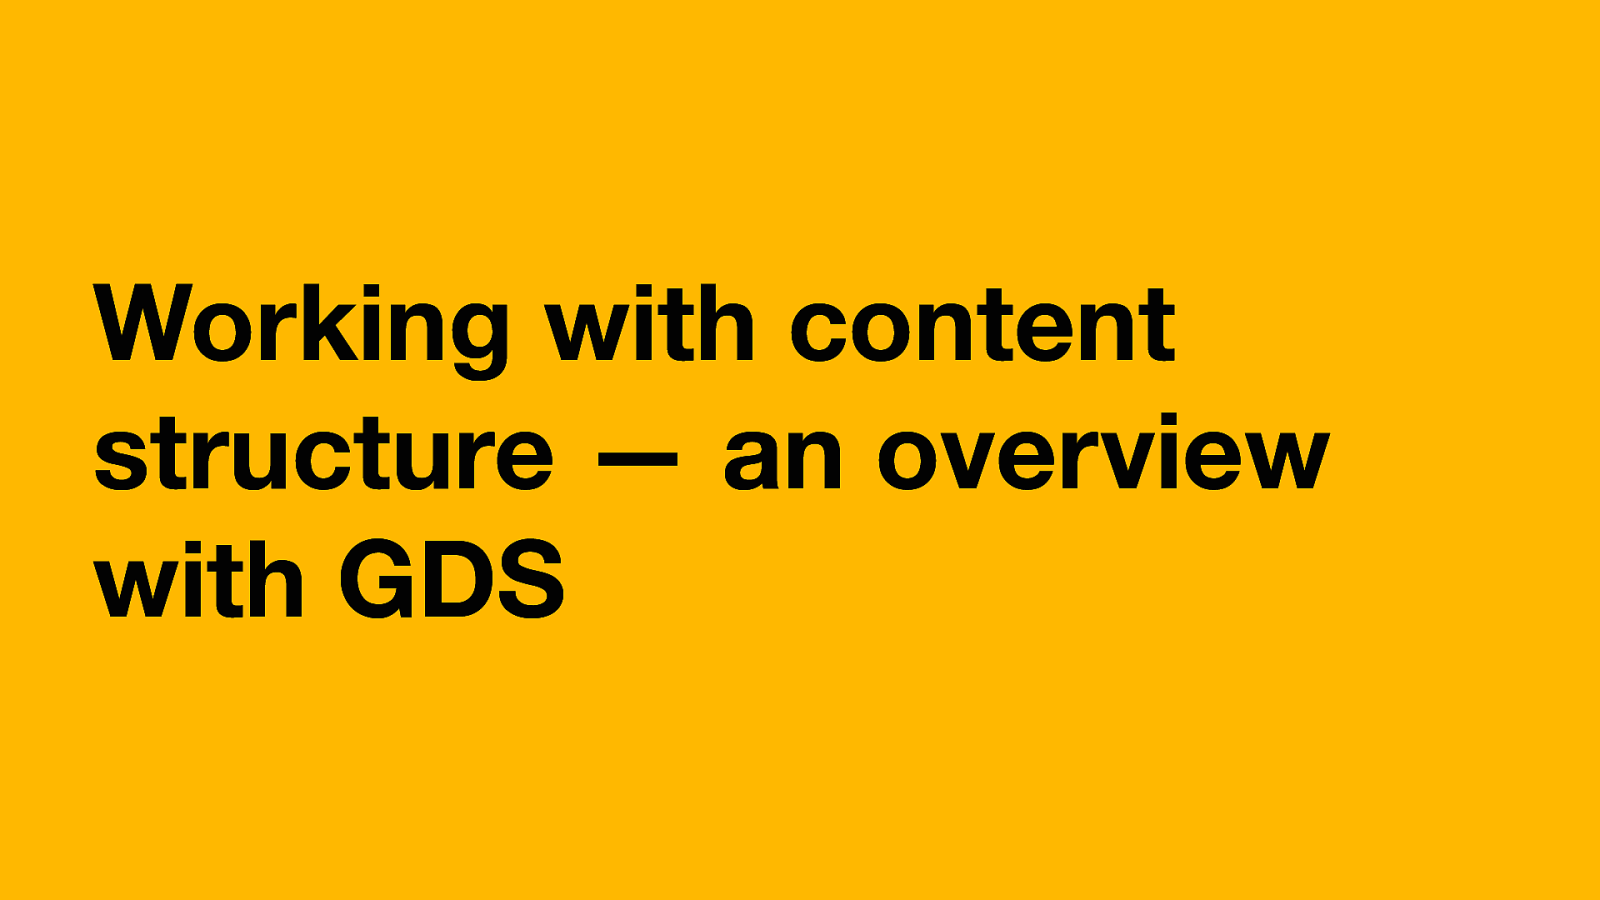 Working with content structure — an overview with GDS by Rik Williams